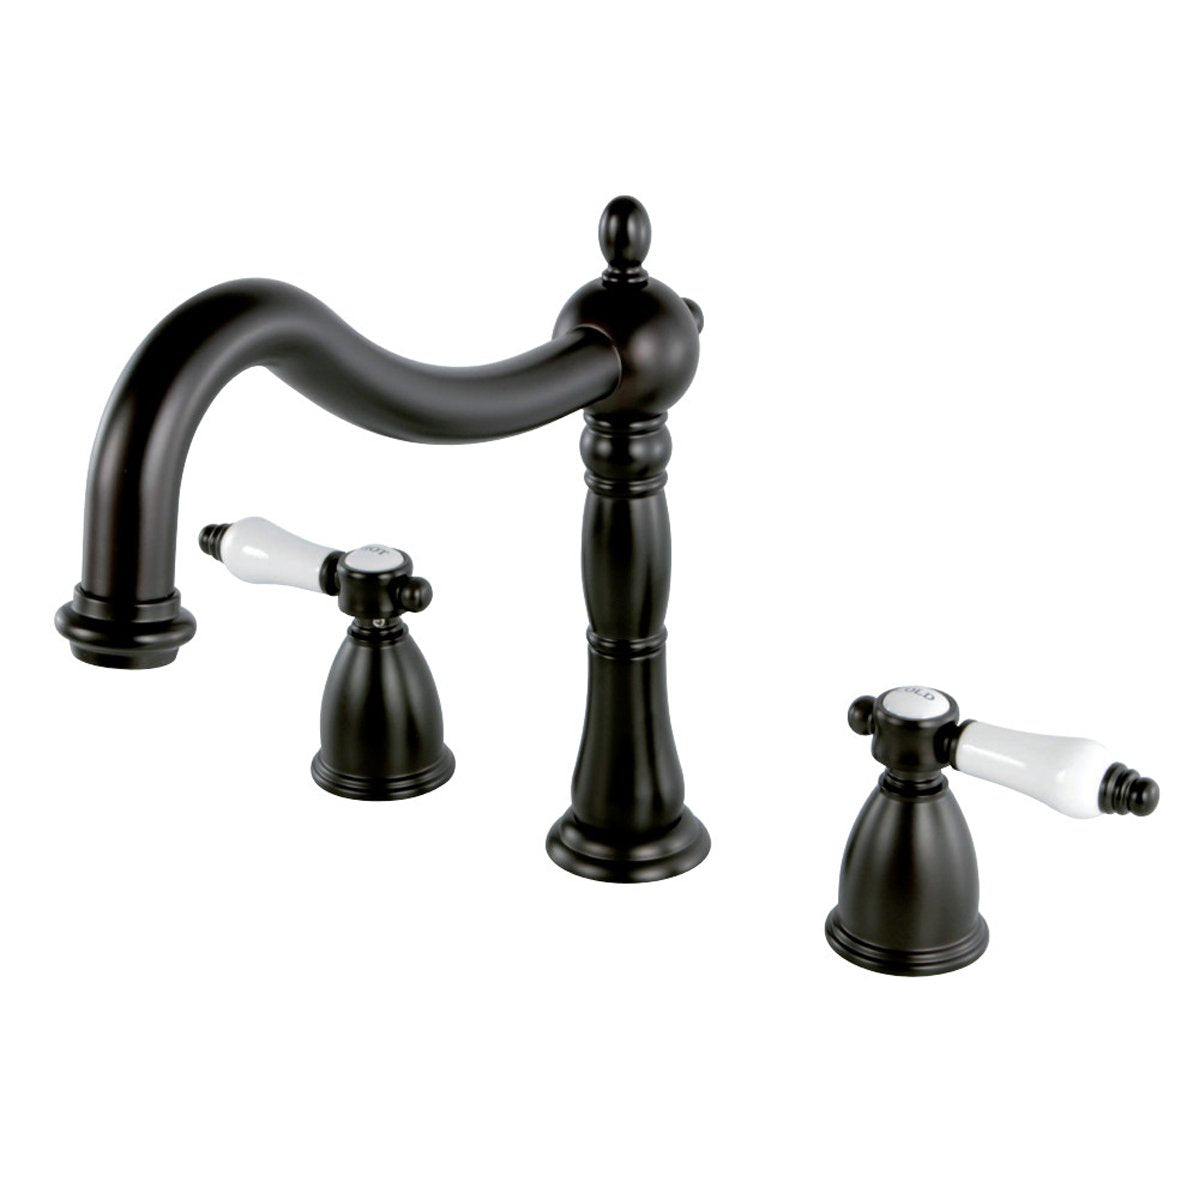 Kingston Brass Bel-Air Roman Tub Filler with Lever Handle